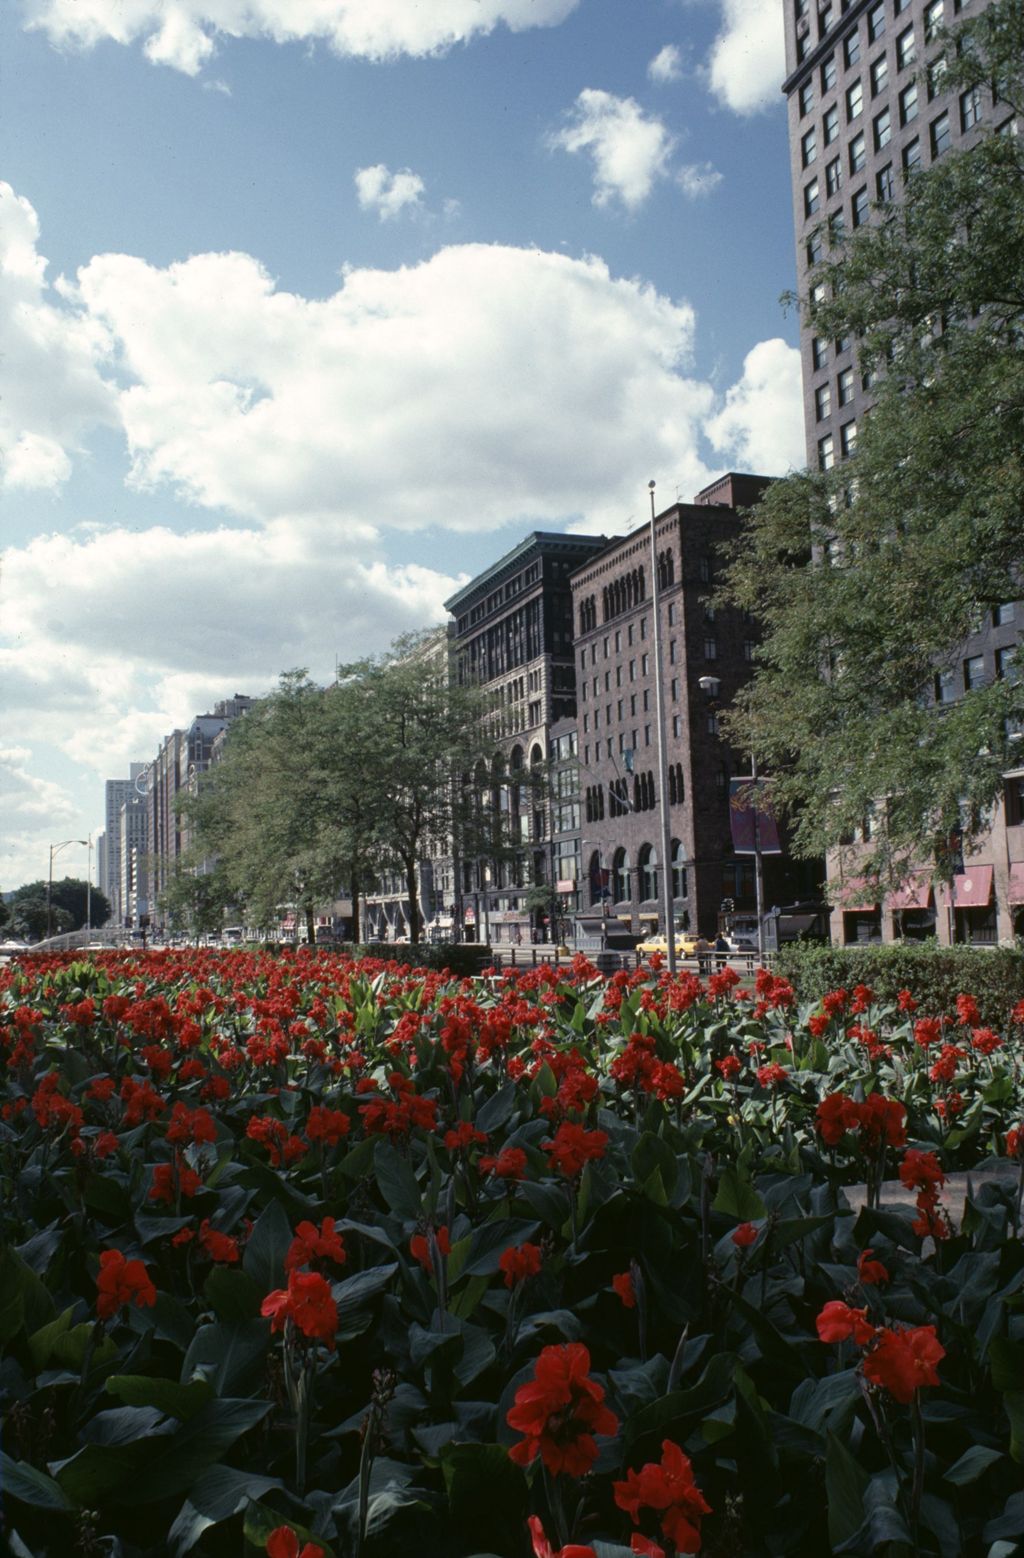 South Michigan Avenue from Grant Park